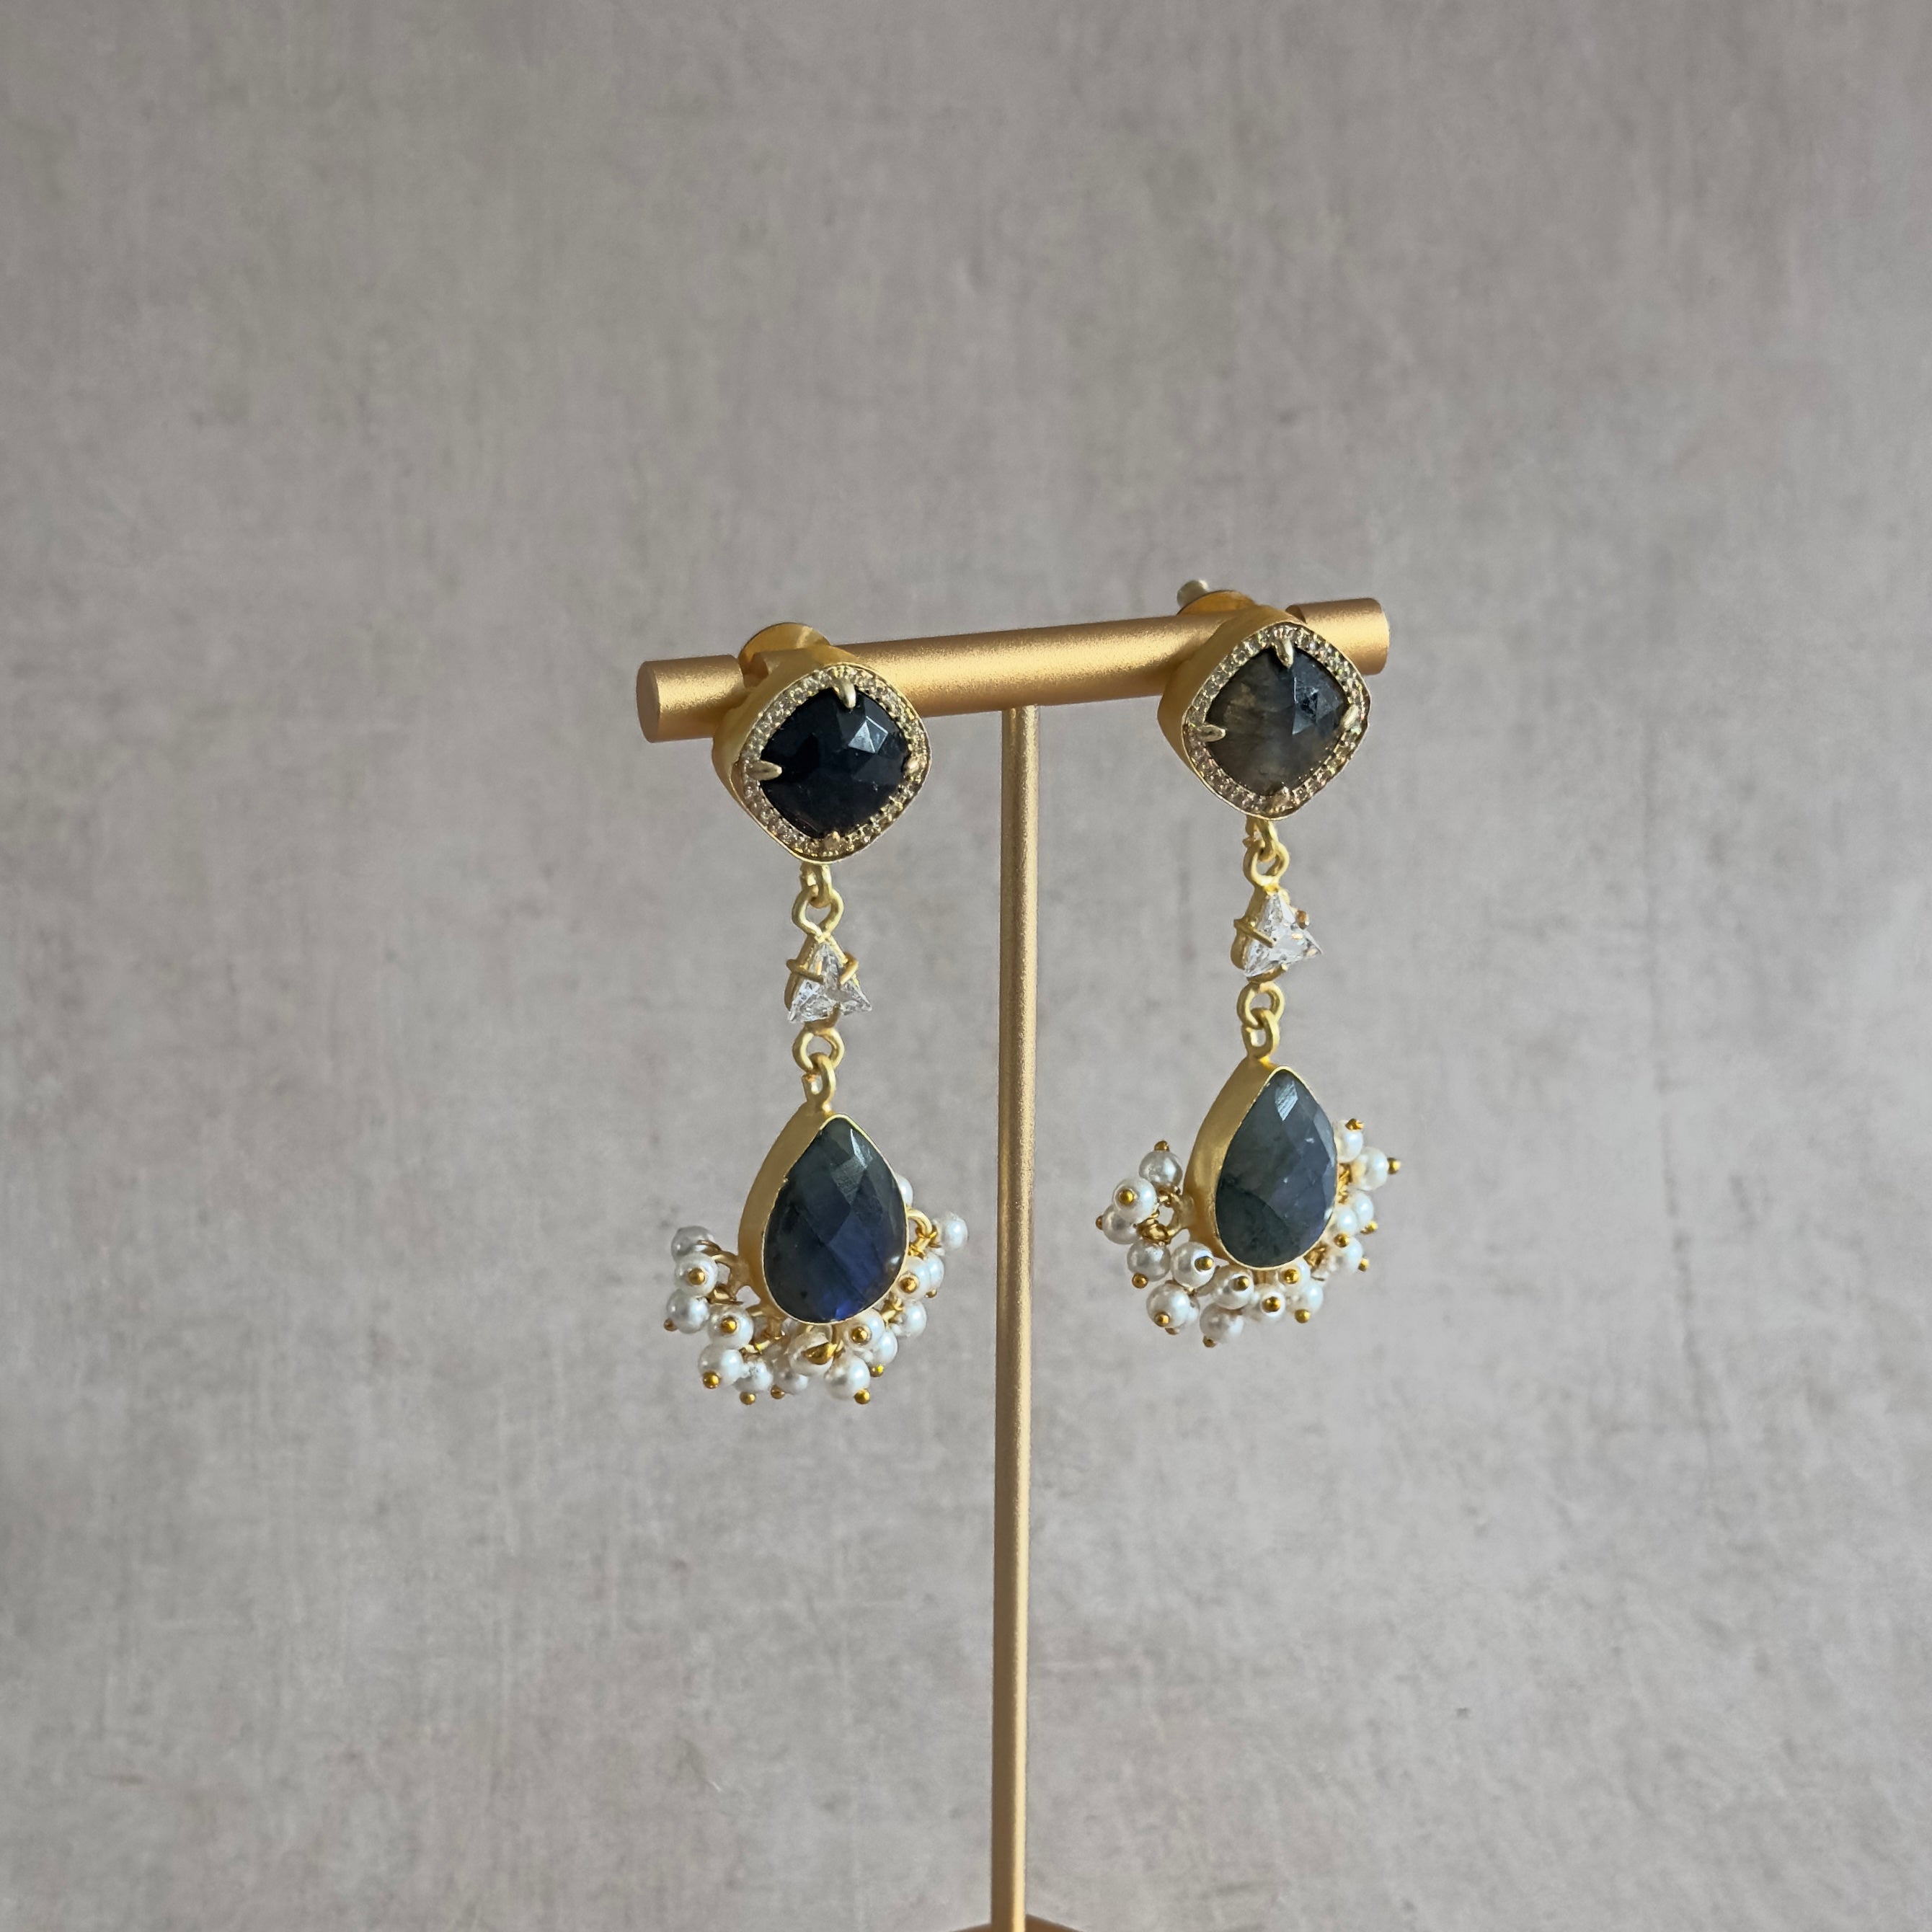 Elevate any look with these Sarah Crystal Drop Earrings, featuring lustrous labradorite stones and a dazzling cubic zirconia crystal. Add a touch of elegance and sparkle to any outfit.